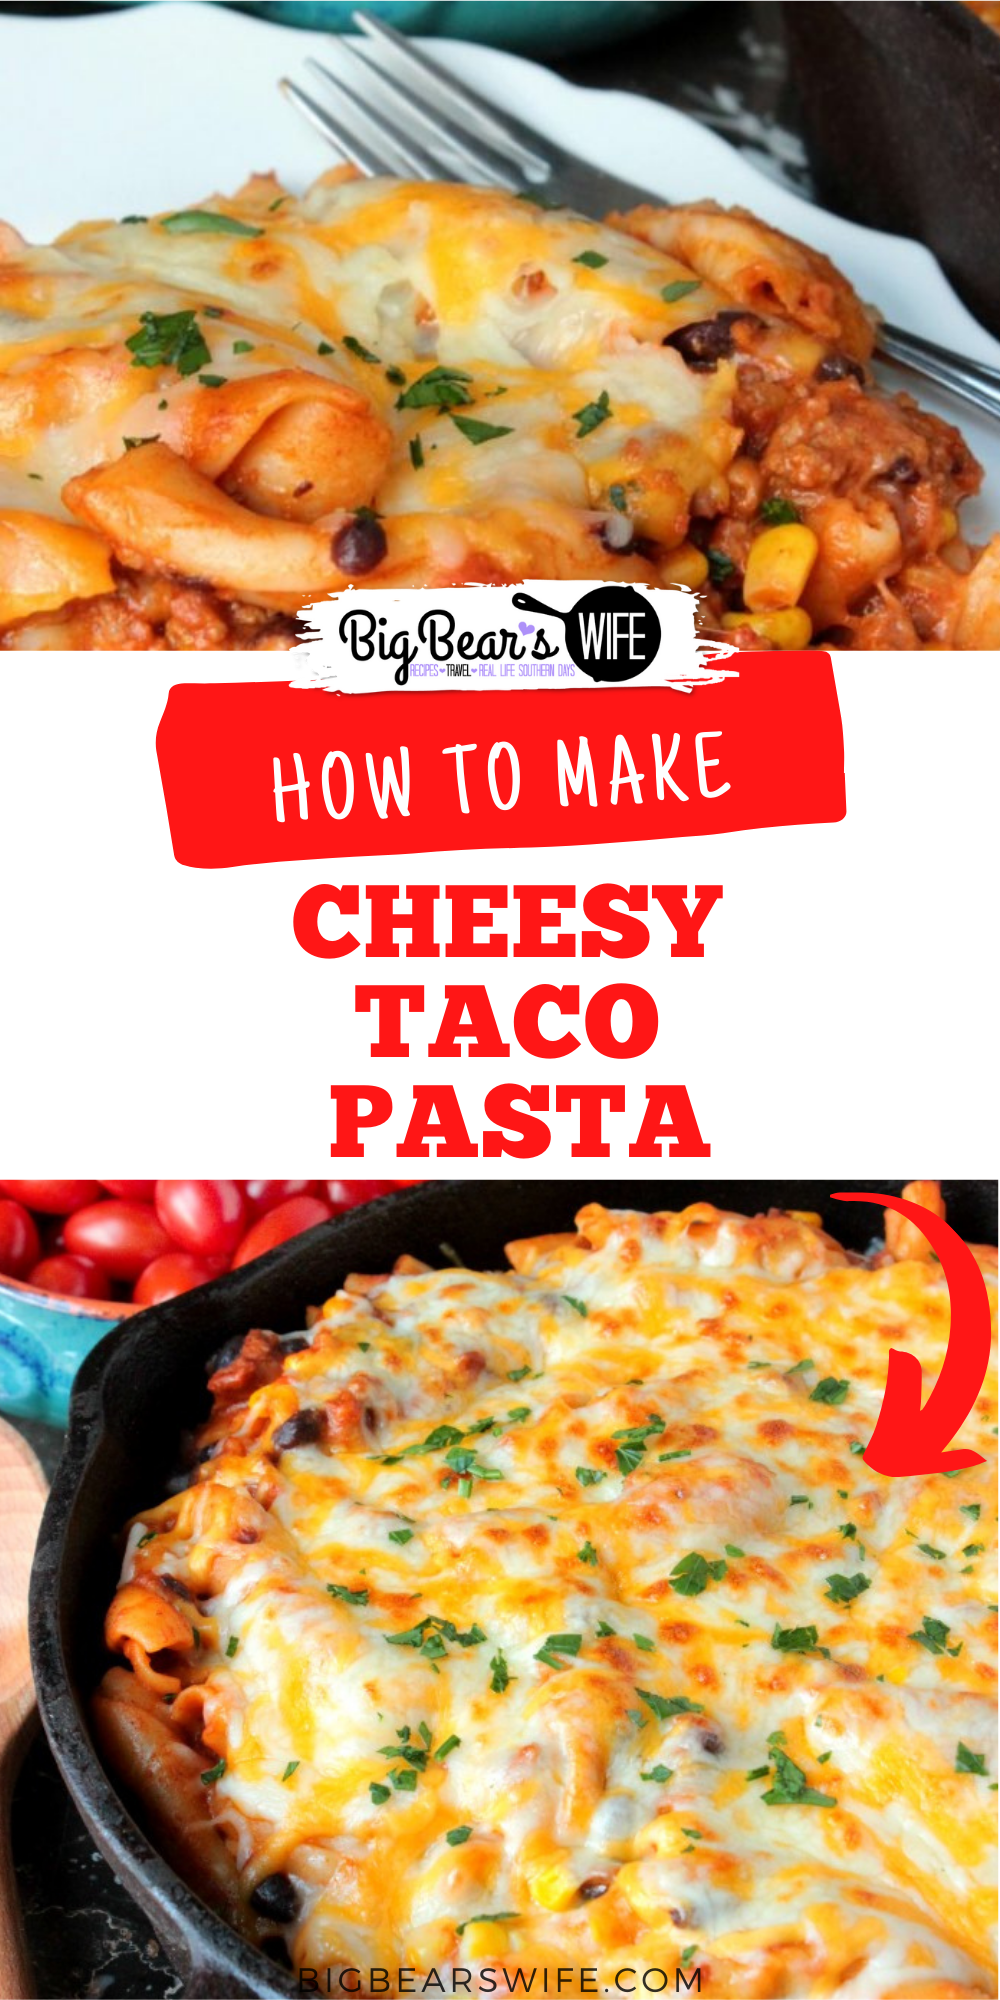 This Cheesy Taco Pasta is packed full of taco seasoning, sweet corn and seasoned black beans! It's thick, cheesy and perfect for any night of the week! via @bigbearswife